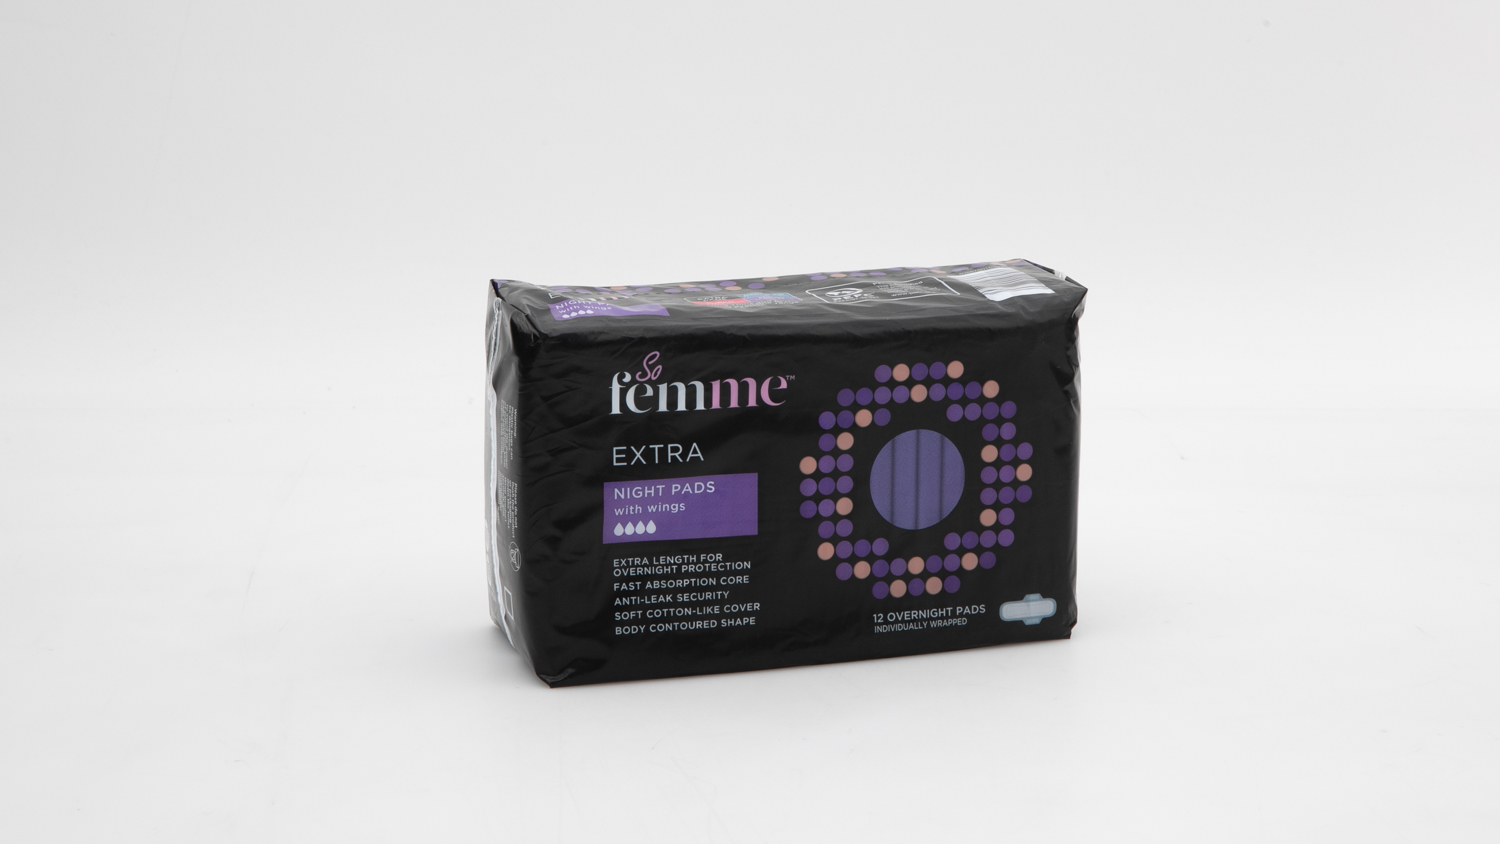 Aldi So Femme Extra Night Pads with wings Review, Sanitary pad